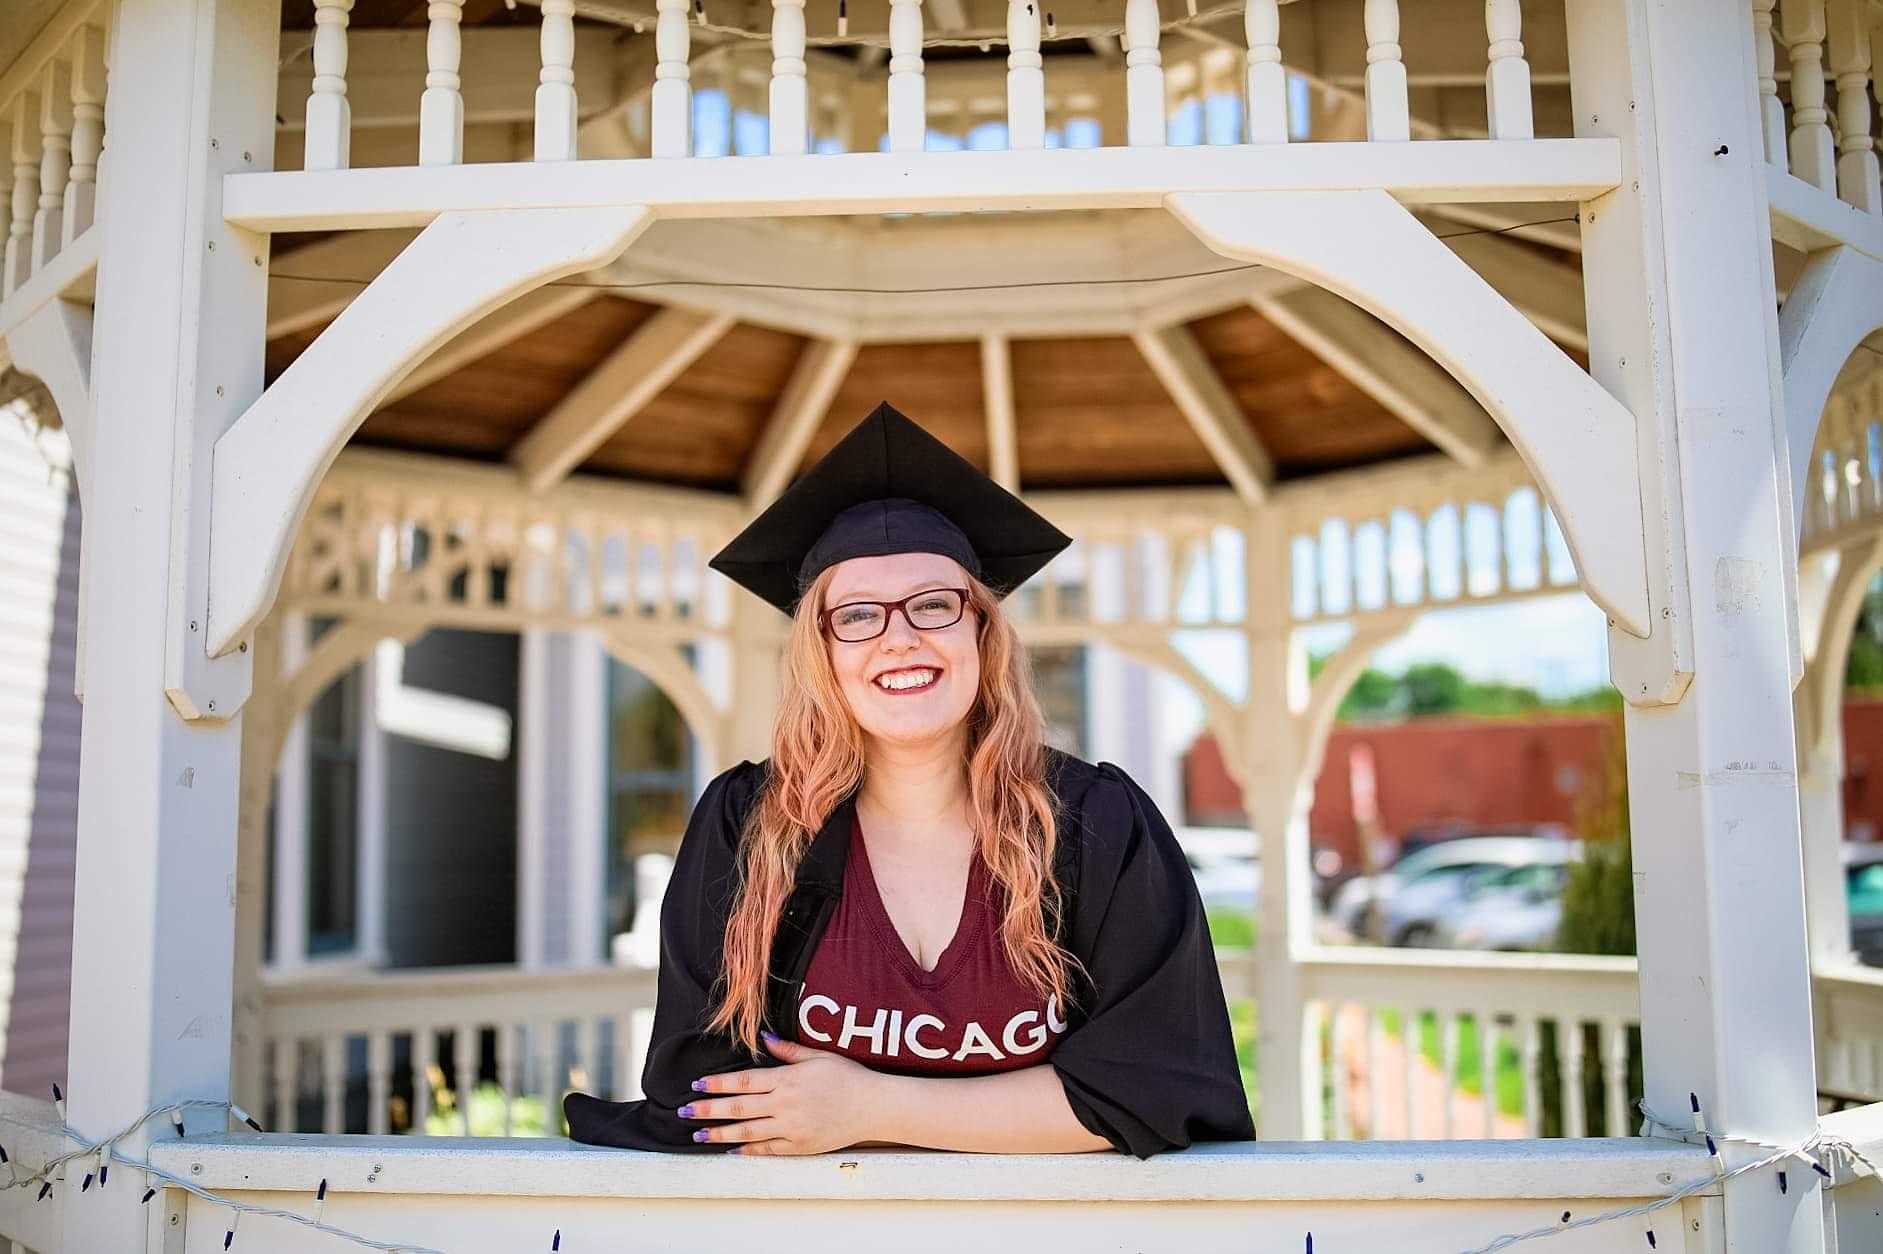 Red haired women with glasses, wearing a grad cap and gown stands in gazebo